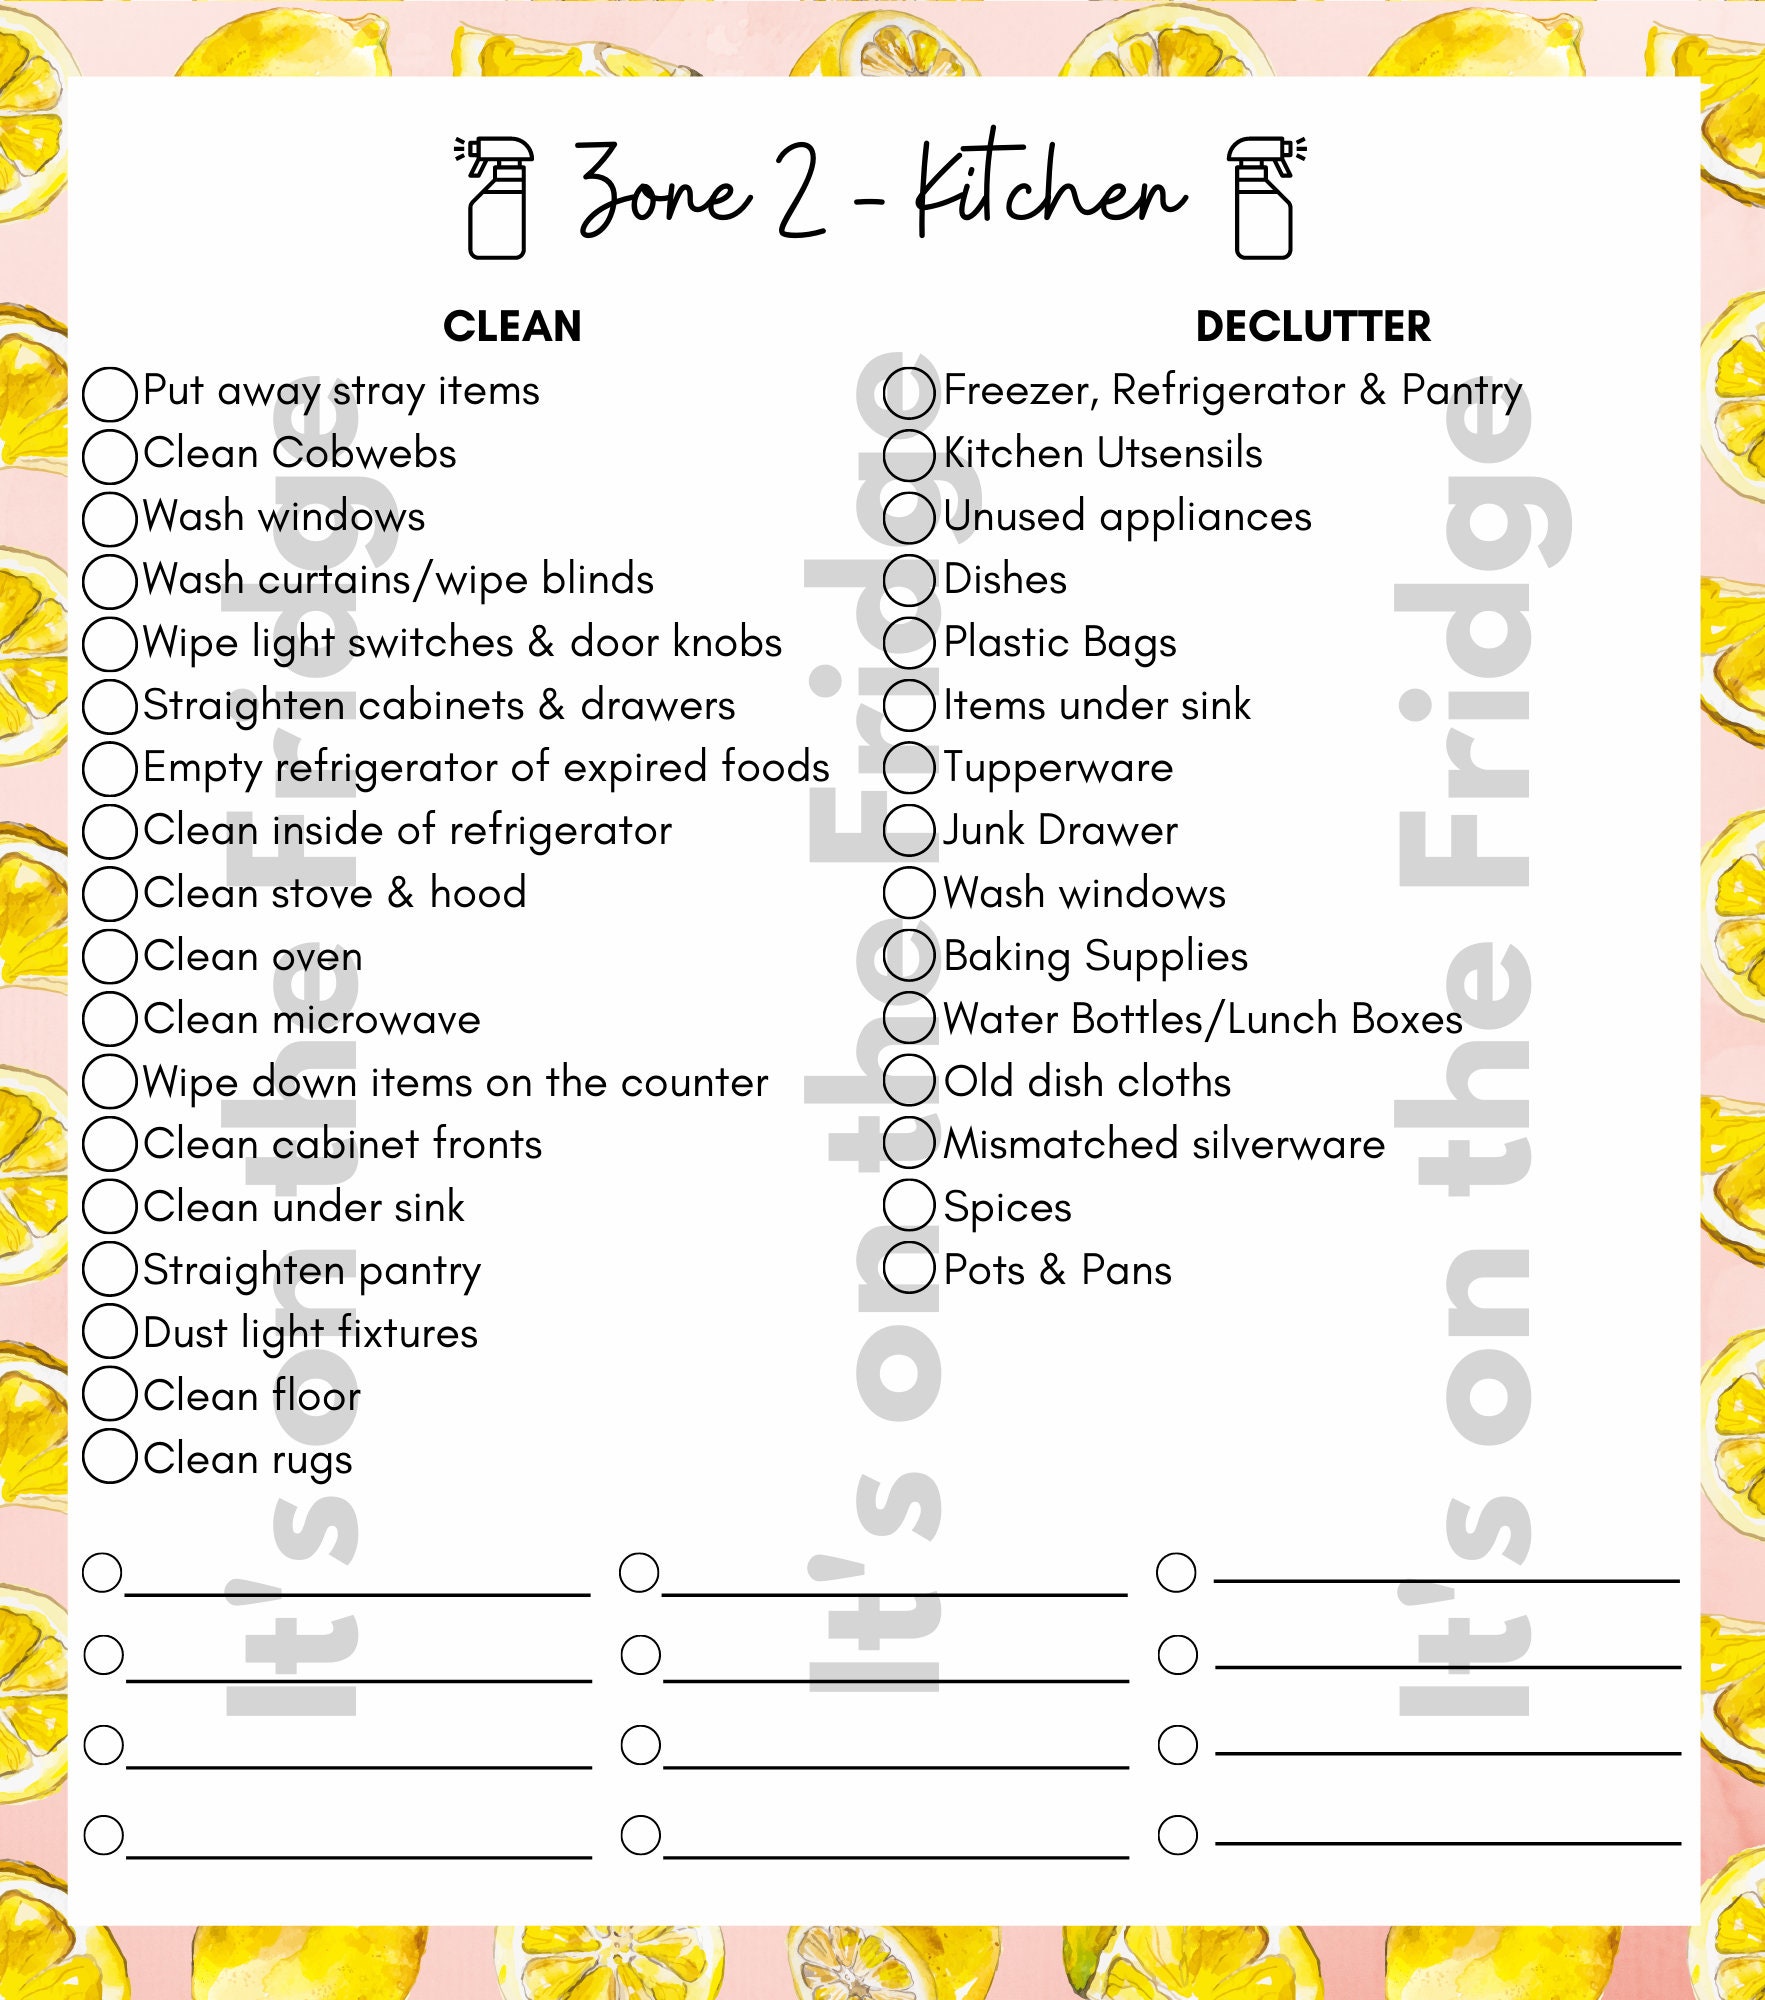 printable-flylady-control-journal-fly-lady-planner-zone-cleaning-schedule-daily-routine